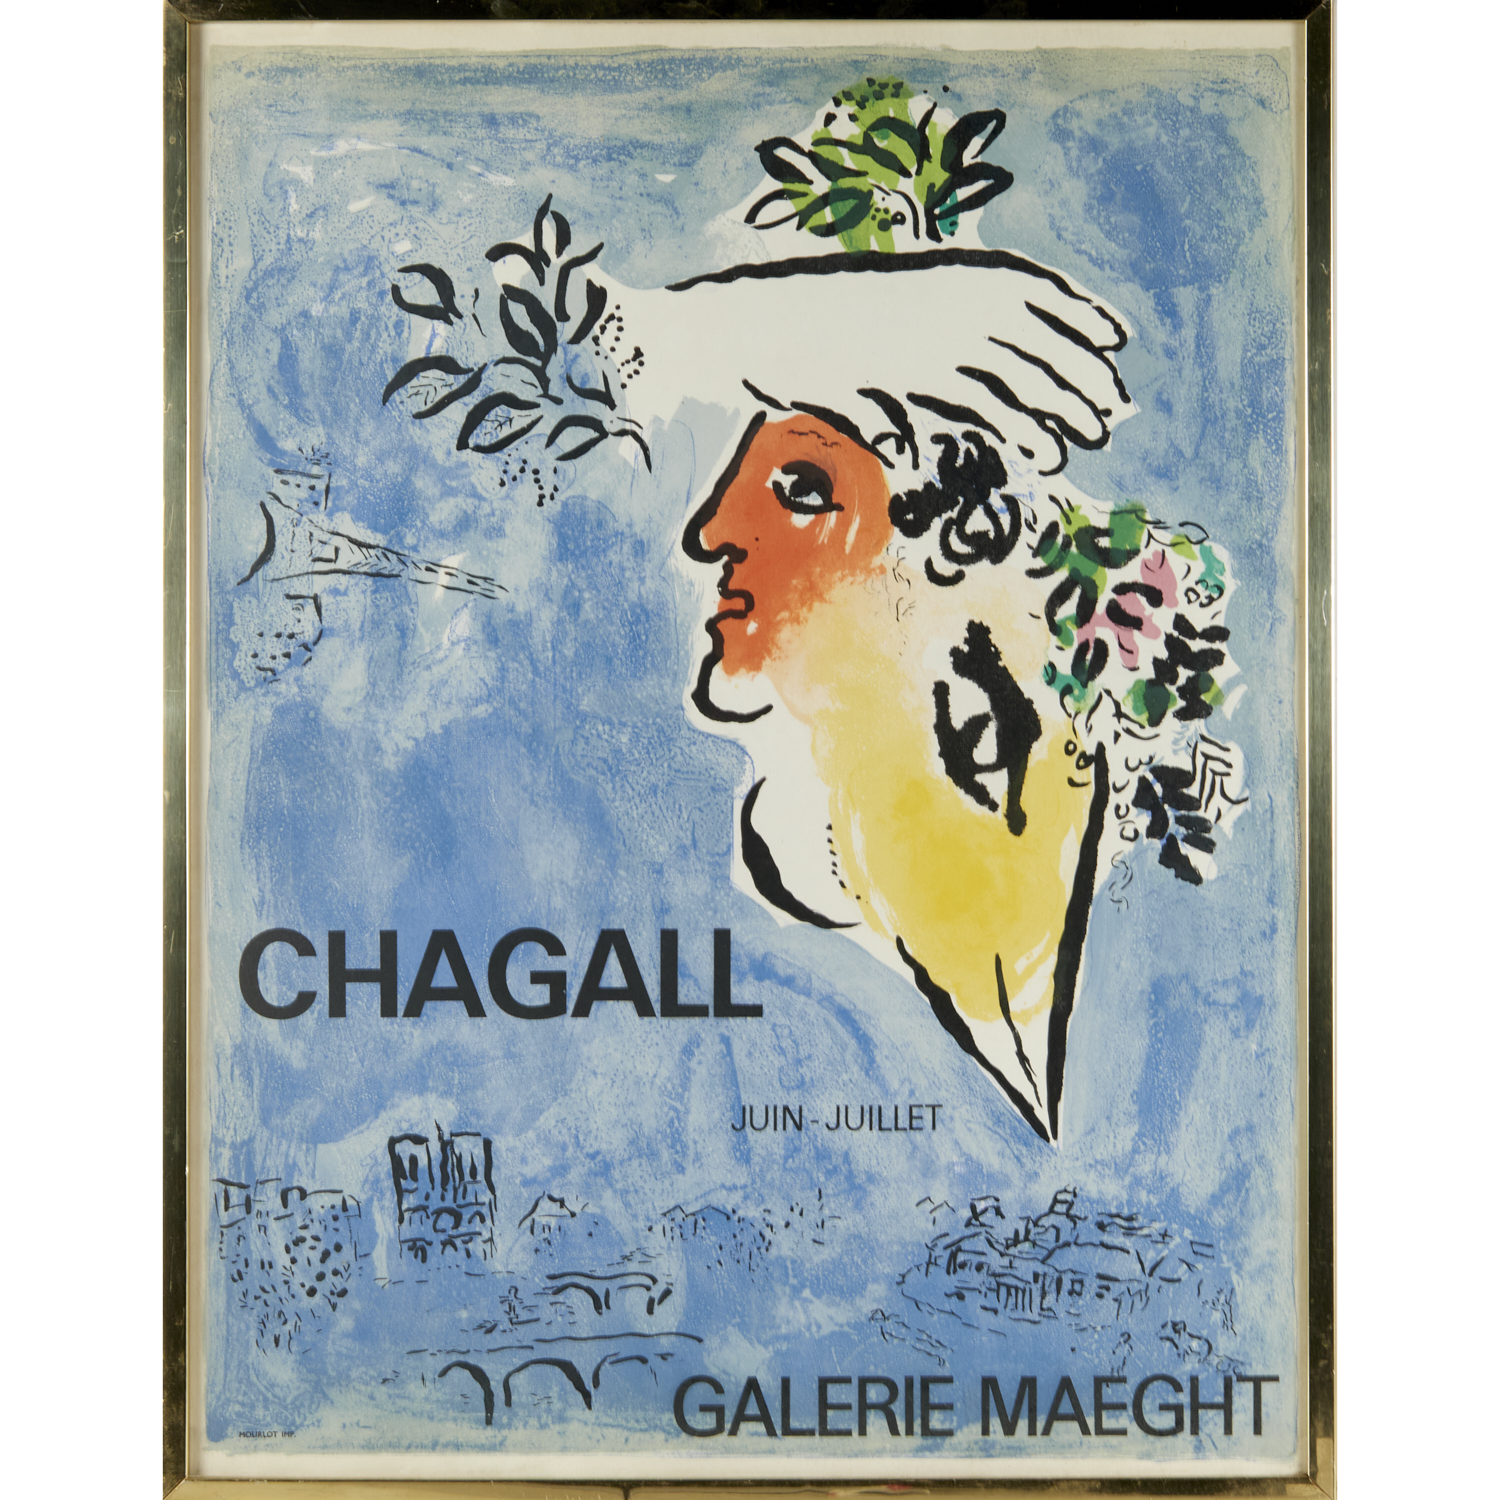 MARC CHAGALL LITHOGRAPHIC POSTER 3608ed